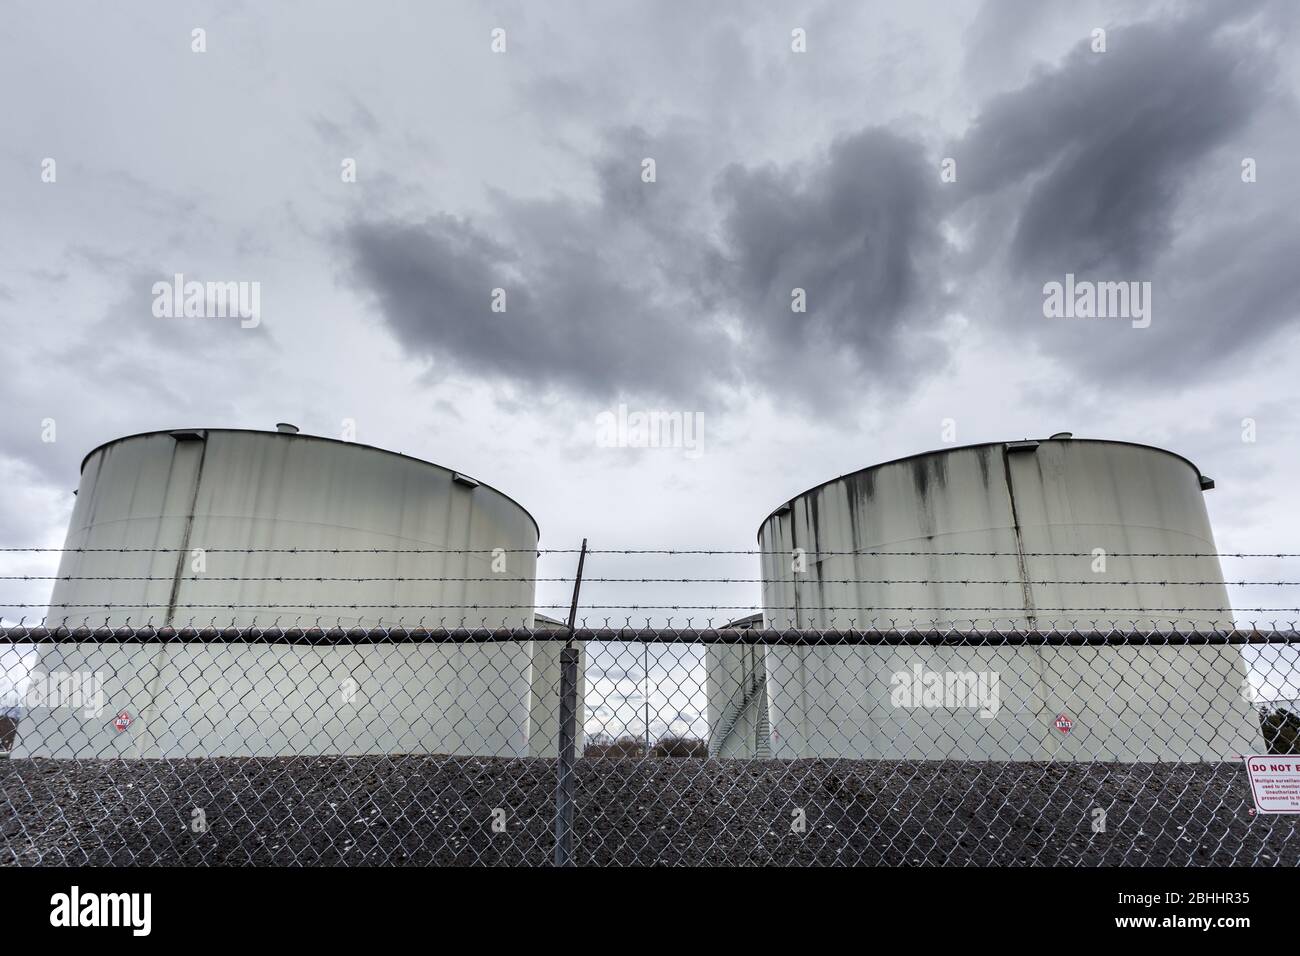 Large jet fuel or oil storage tanks behind a chain link fence with warning signs. Stock Photo